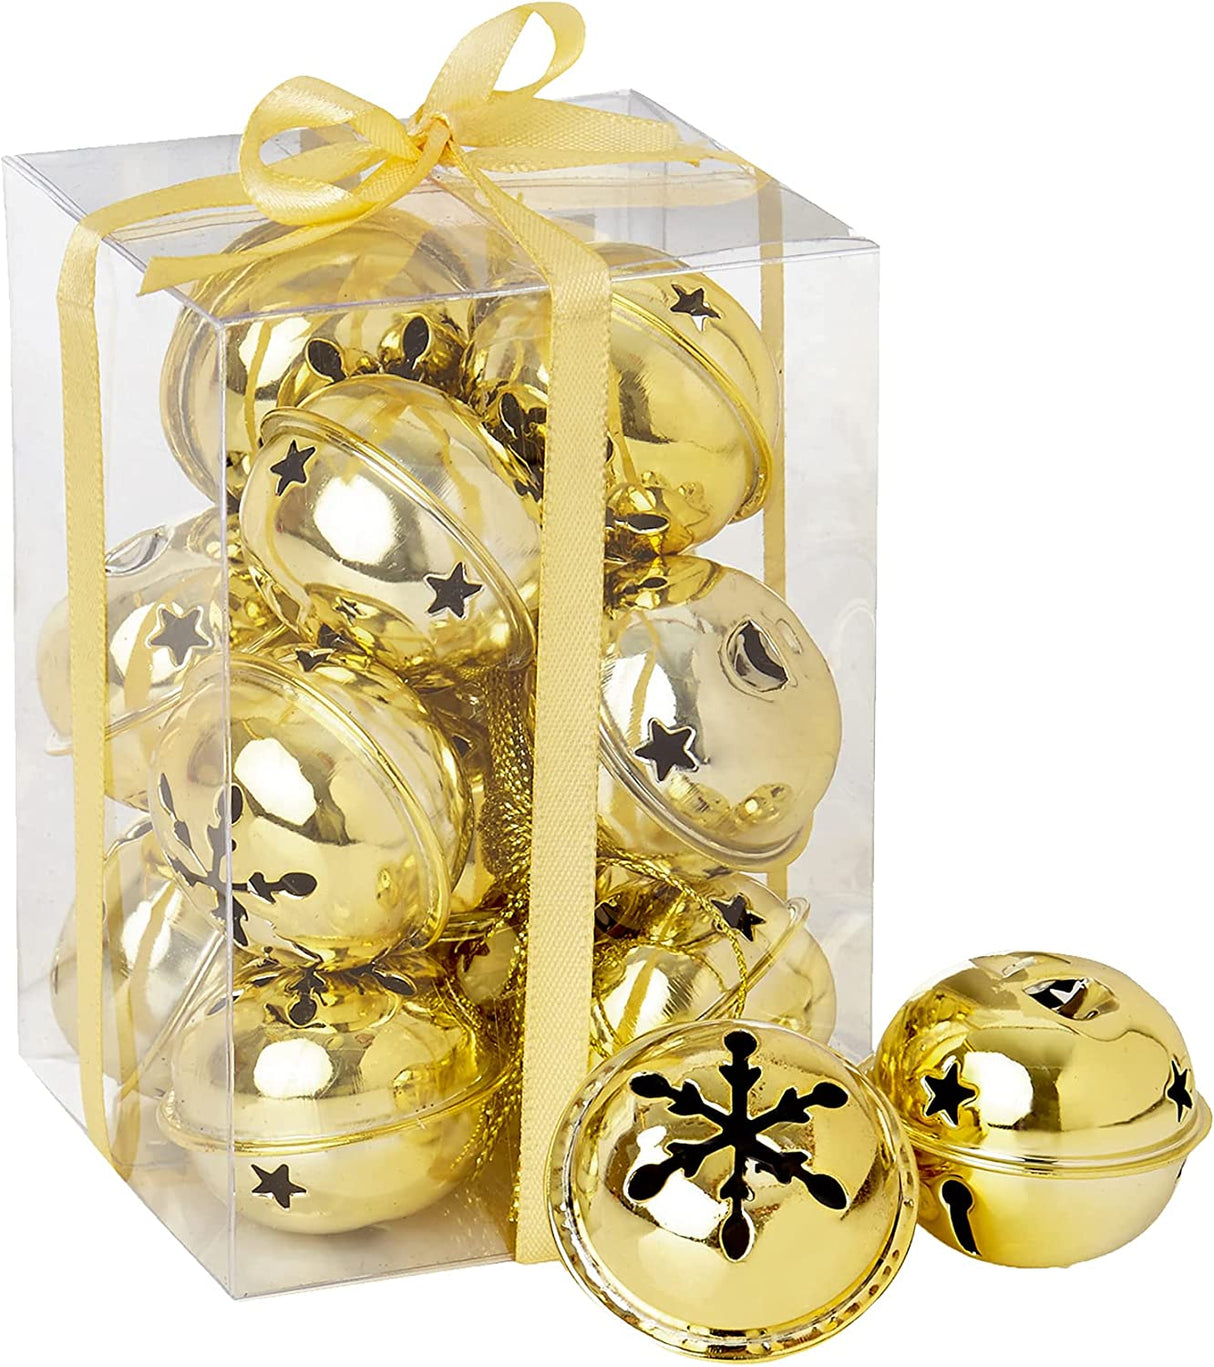 Set of 12 Gold Jingle Bells Christmas Tree Decorations Baubles 40mm